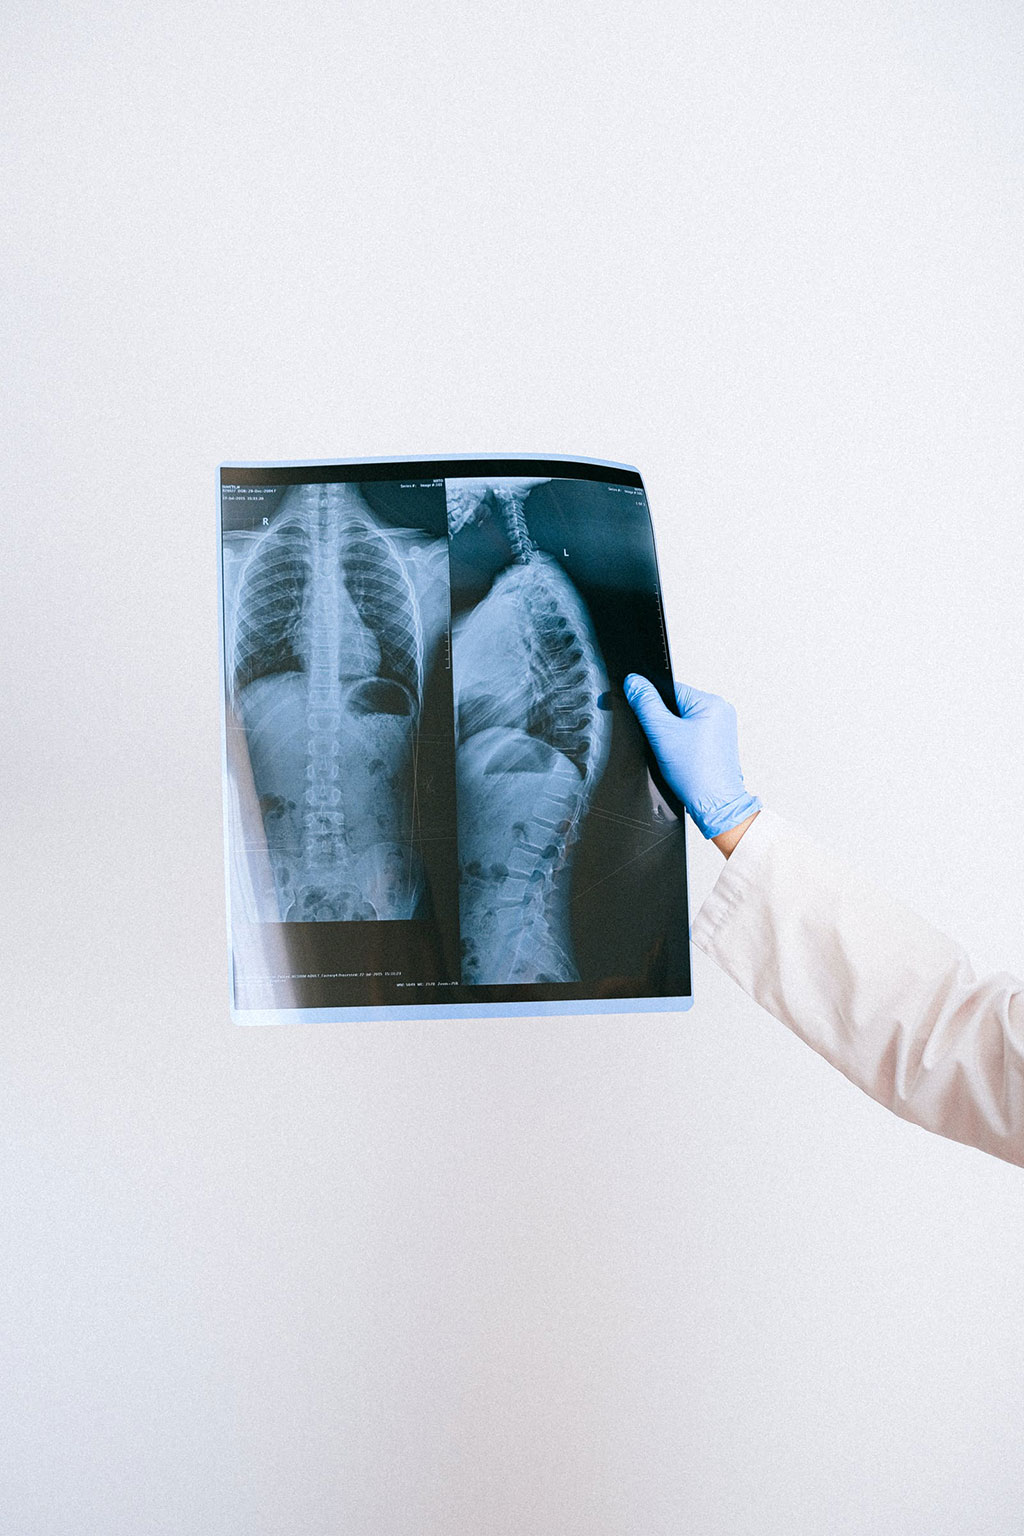 Image: Spinal fractures in the elderly are preventable with simple X-rays (Photo courtesy of Pexels)